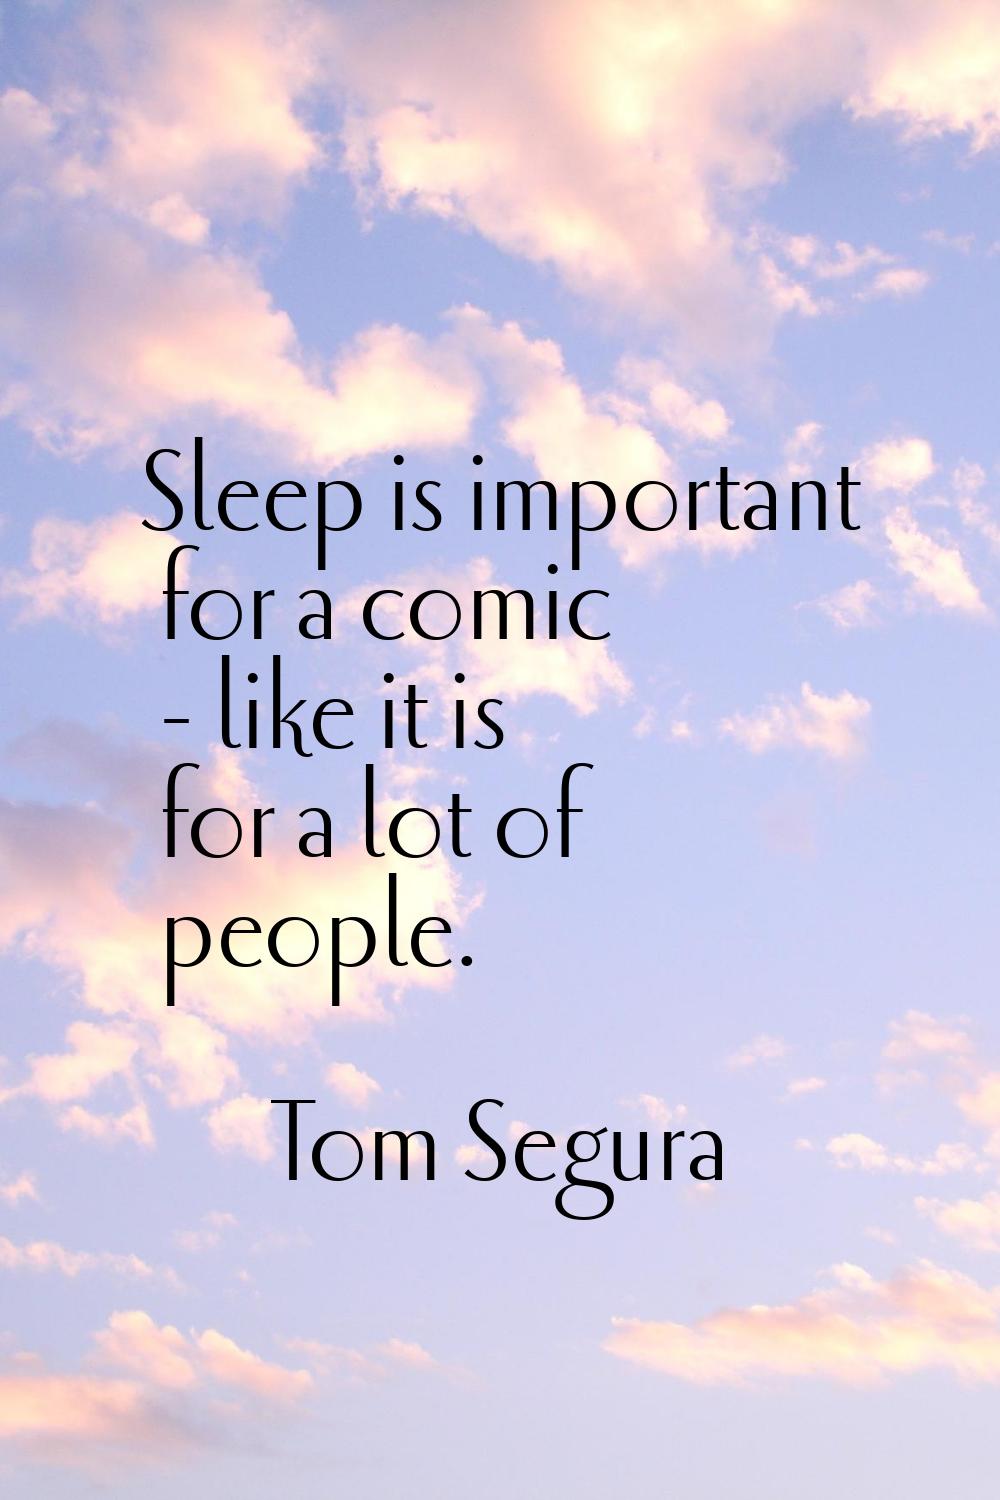 Sleep is important for a comic - like it is for a lot of people.